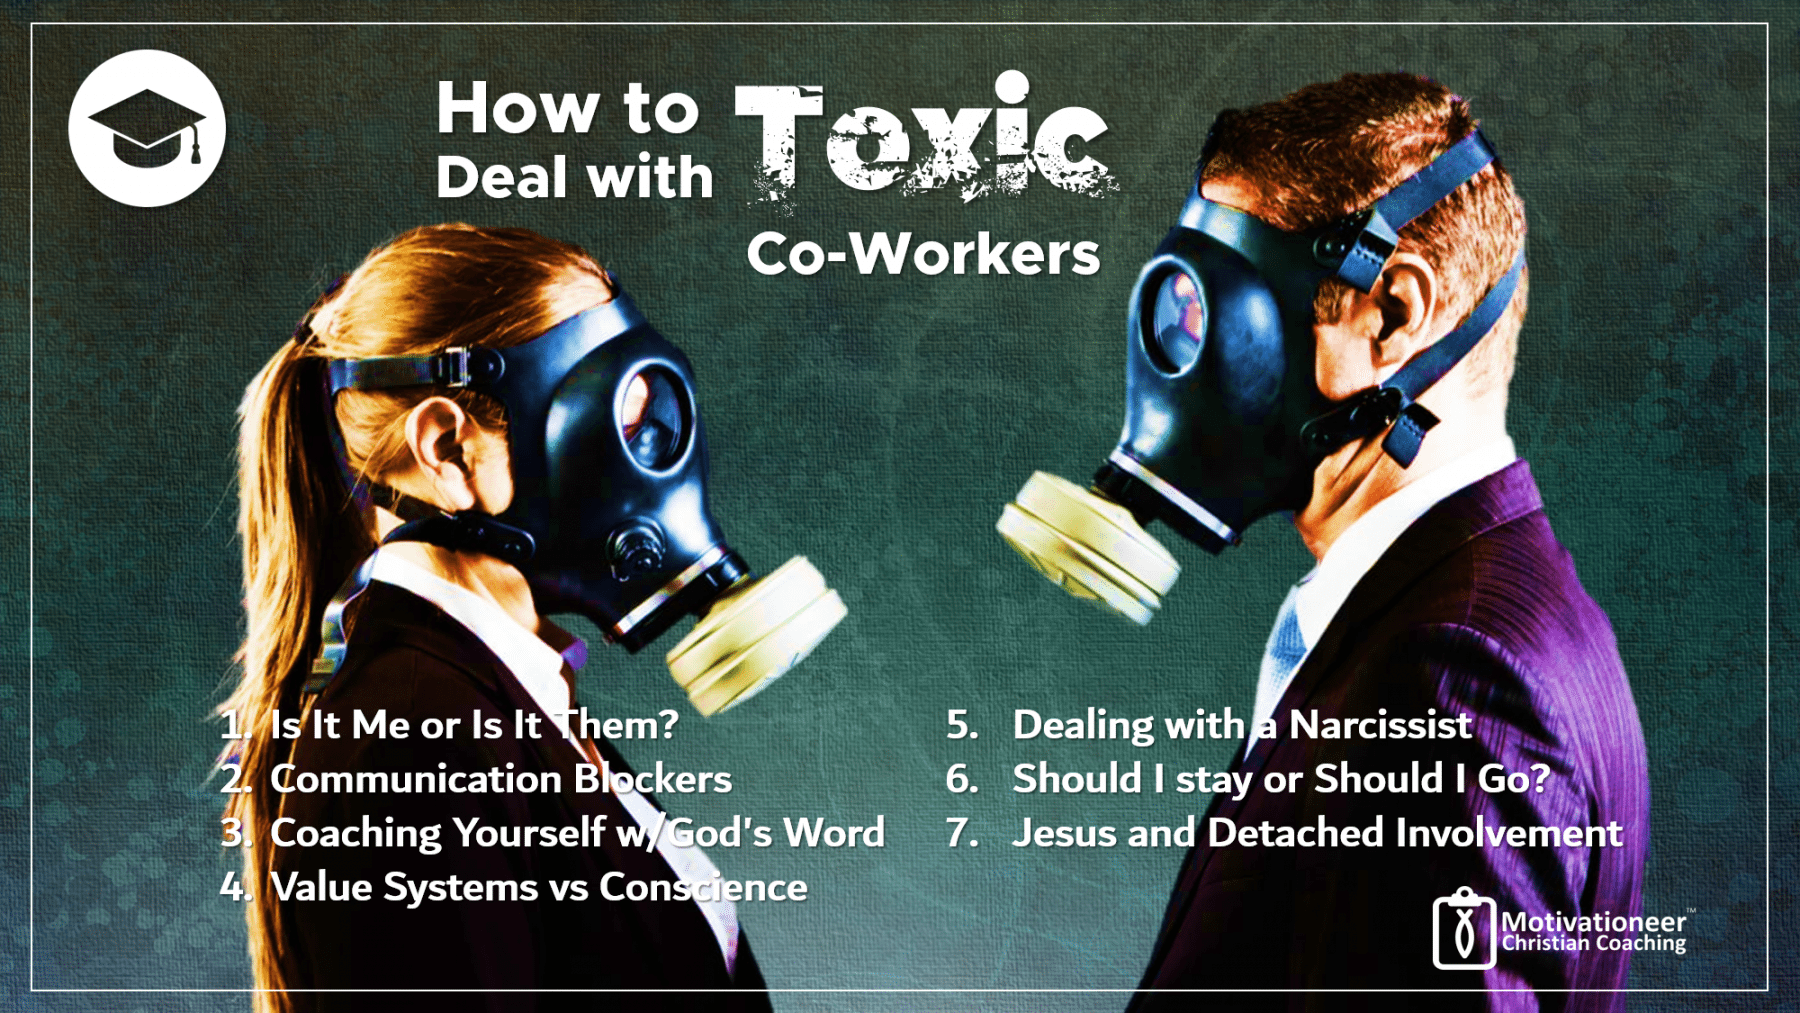 How To Deal With Toxic Co-Workers